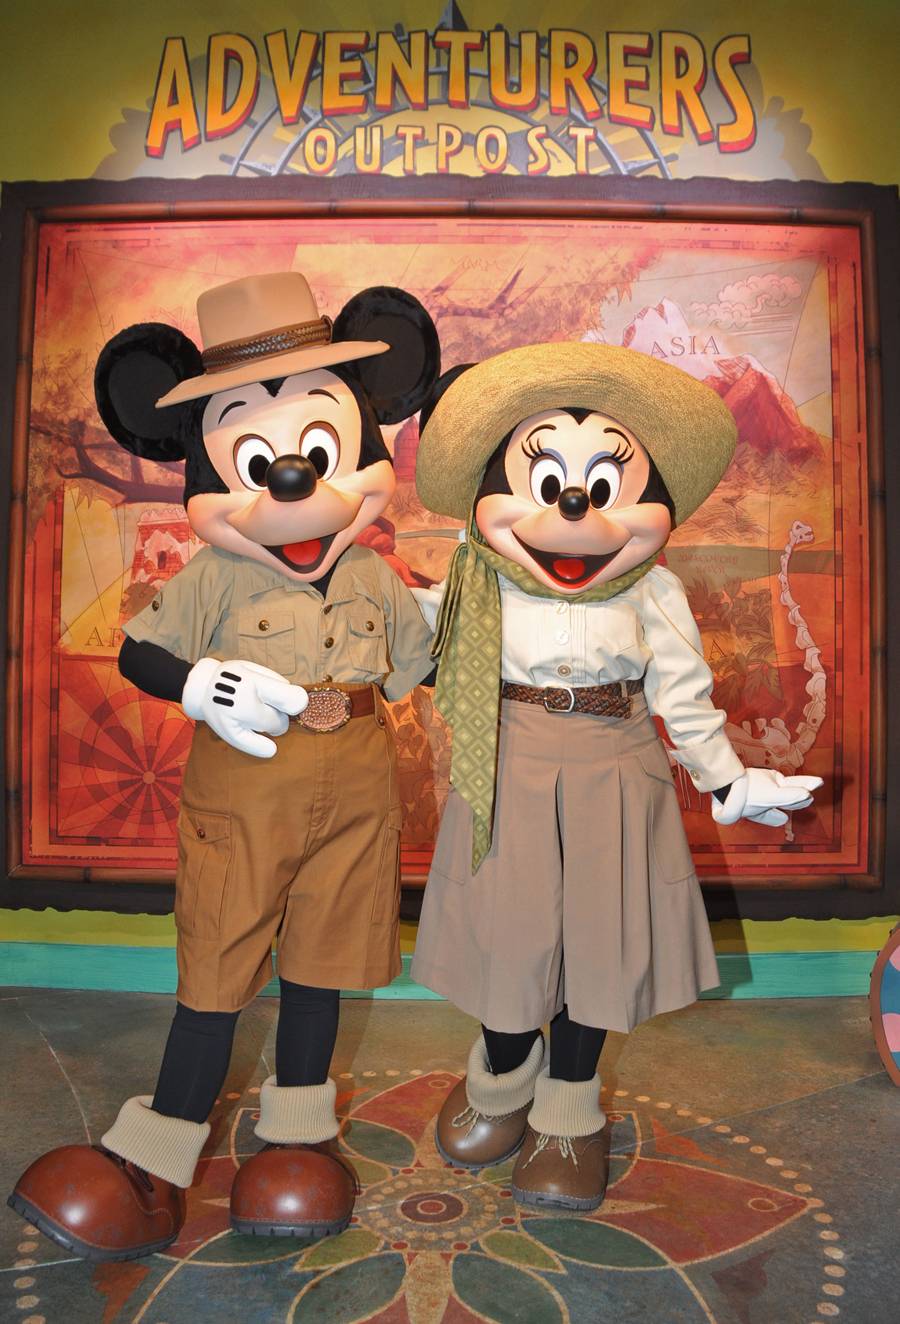 Mickey and Minnie at the Adventurers Outpost